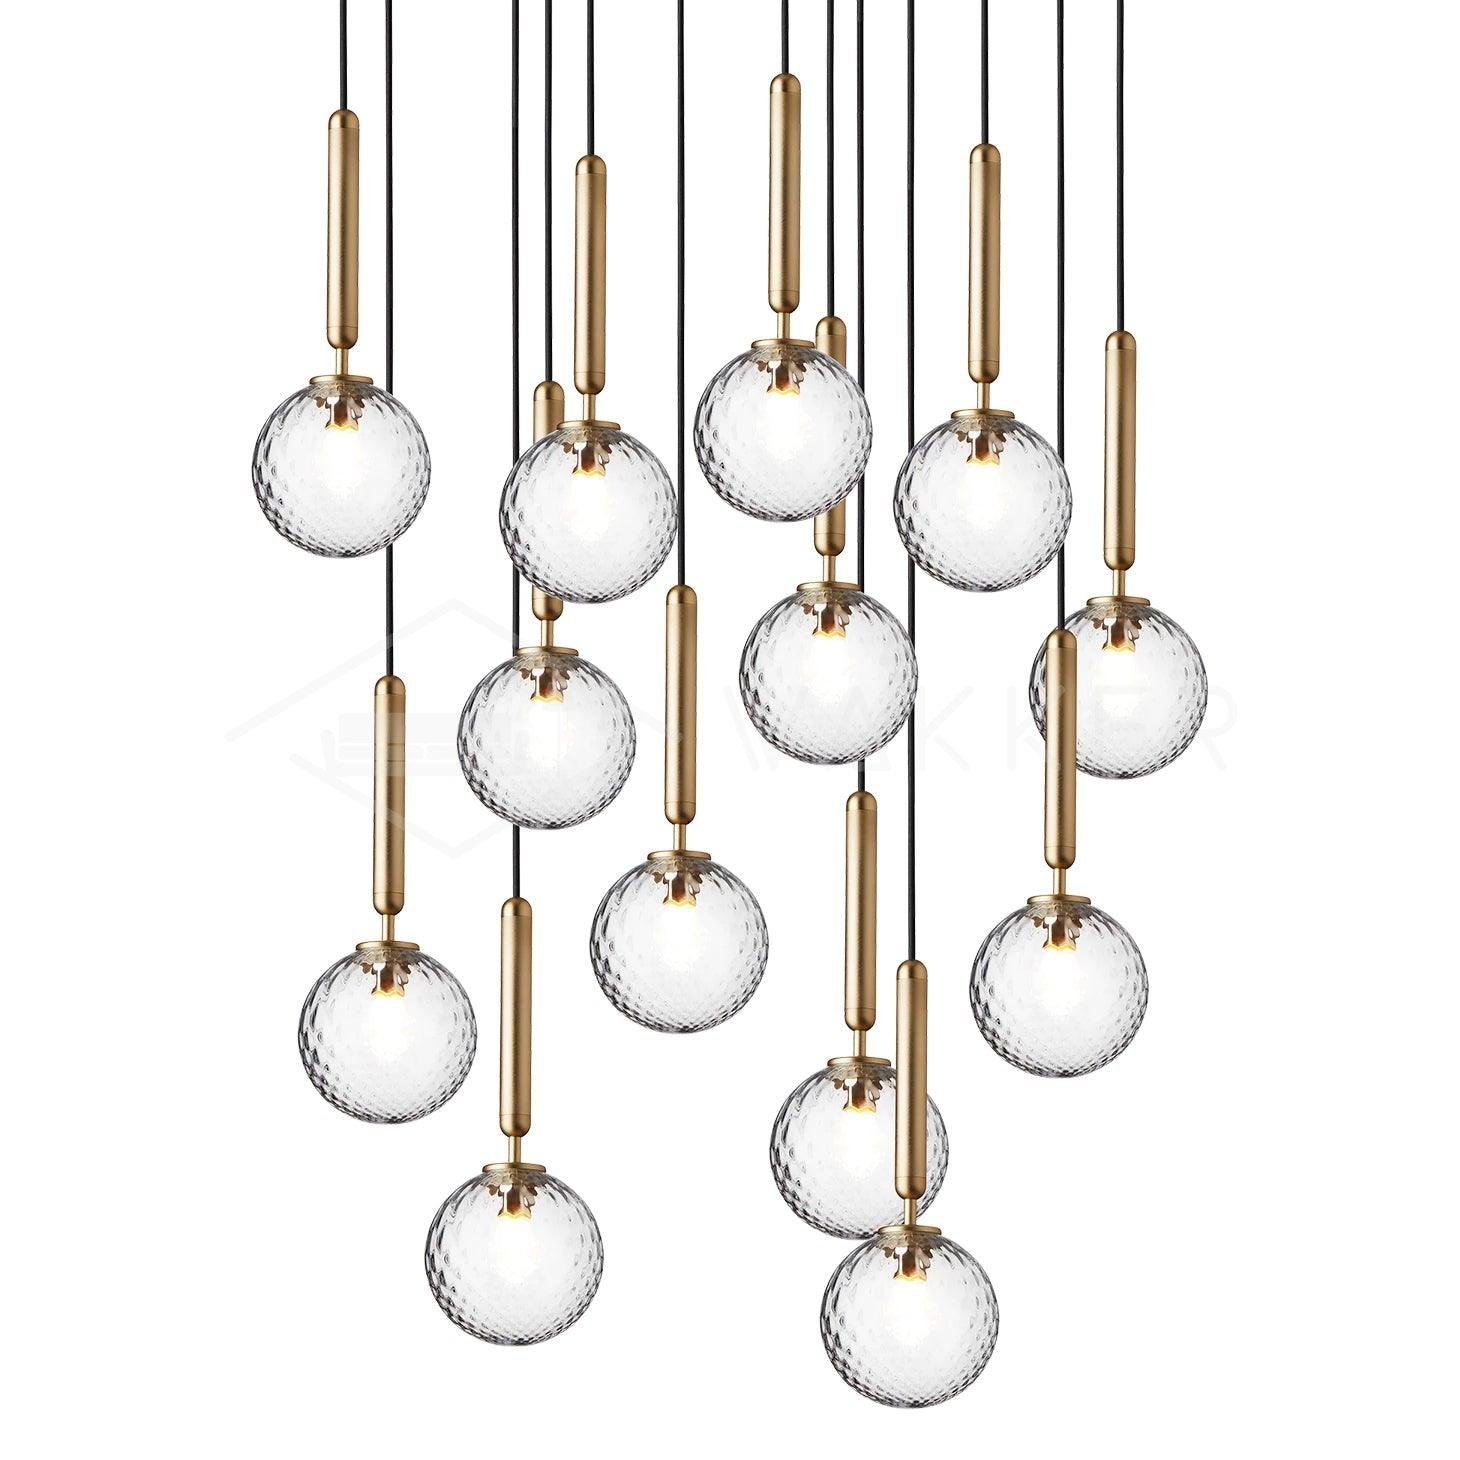 13-Head Miira Brass Pendant Light with a Diameter of 23.6 inches and Height of 78.7 inches (60cm x 200cm). Made of Brass with a Clear finish.